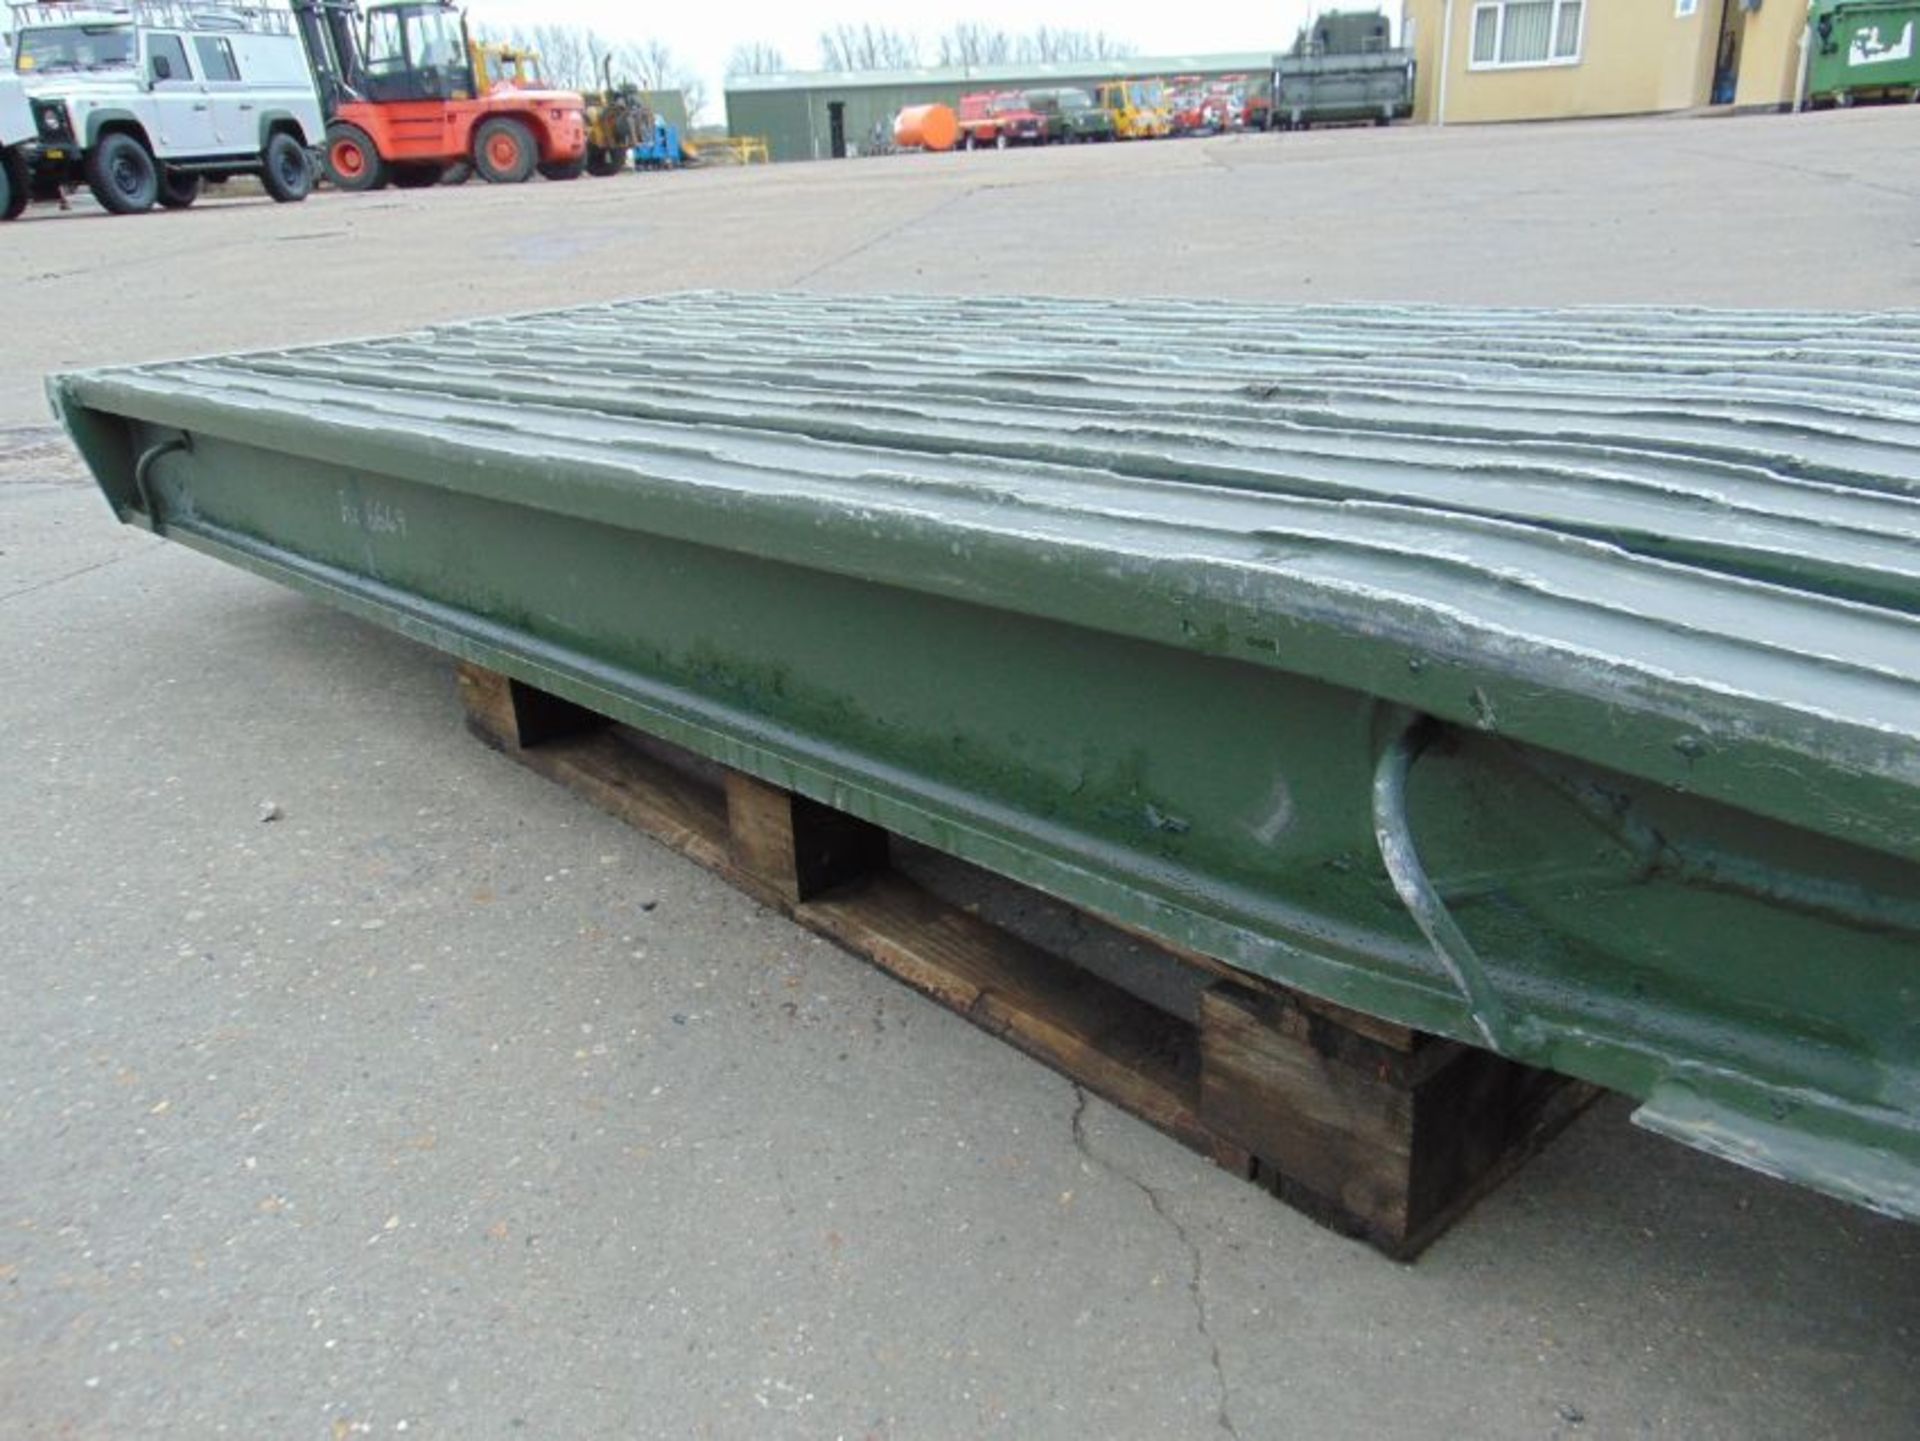 Pair of Very Heavy Duty Aluminium Clip on Vehicle Loading Ramps, 3 m long, 0.54 m wide. - Image 4 of 6